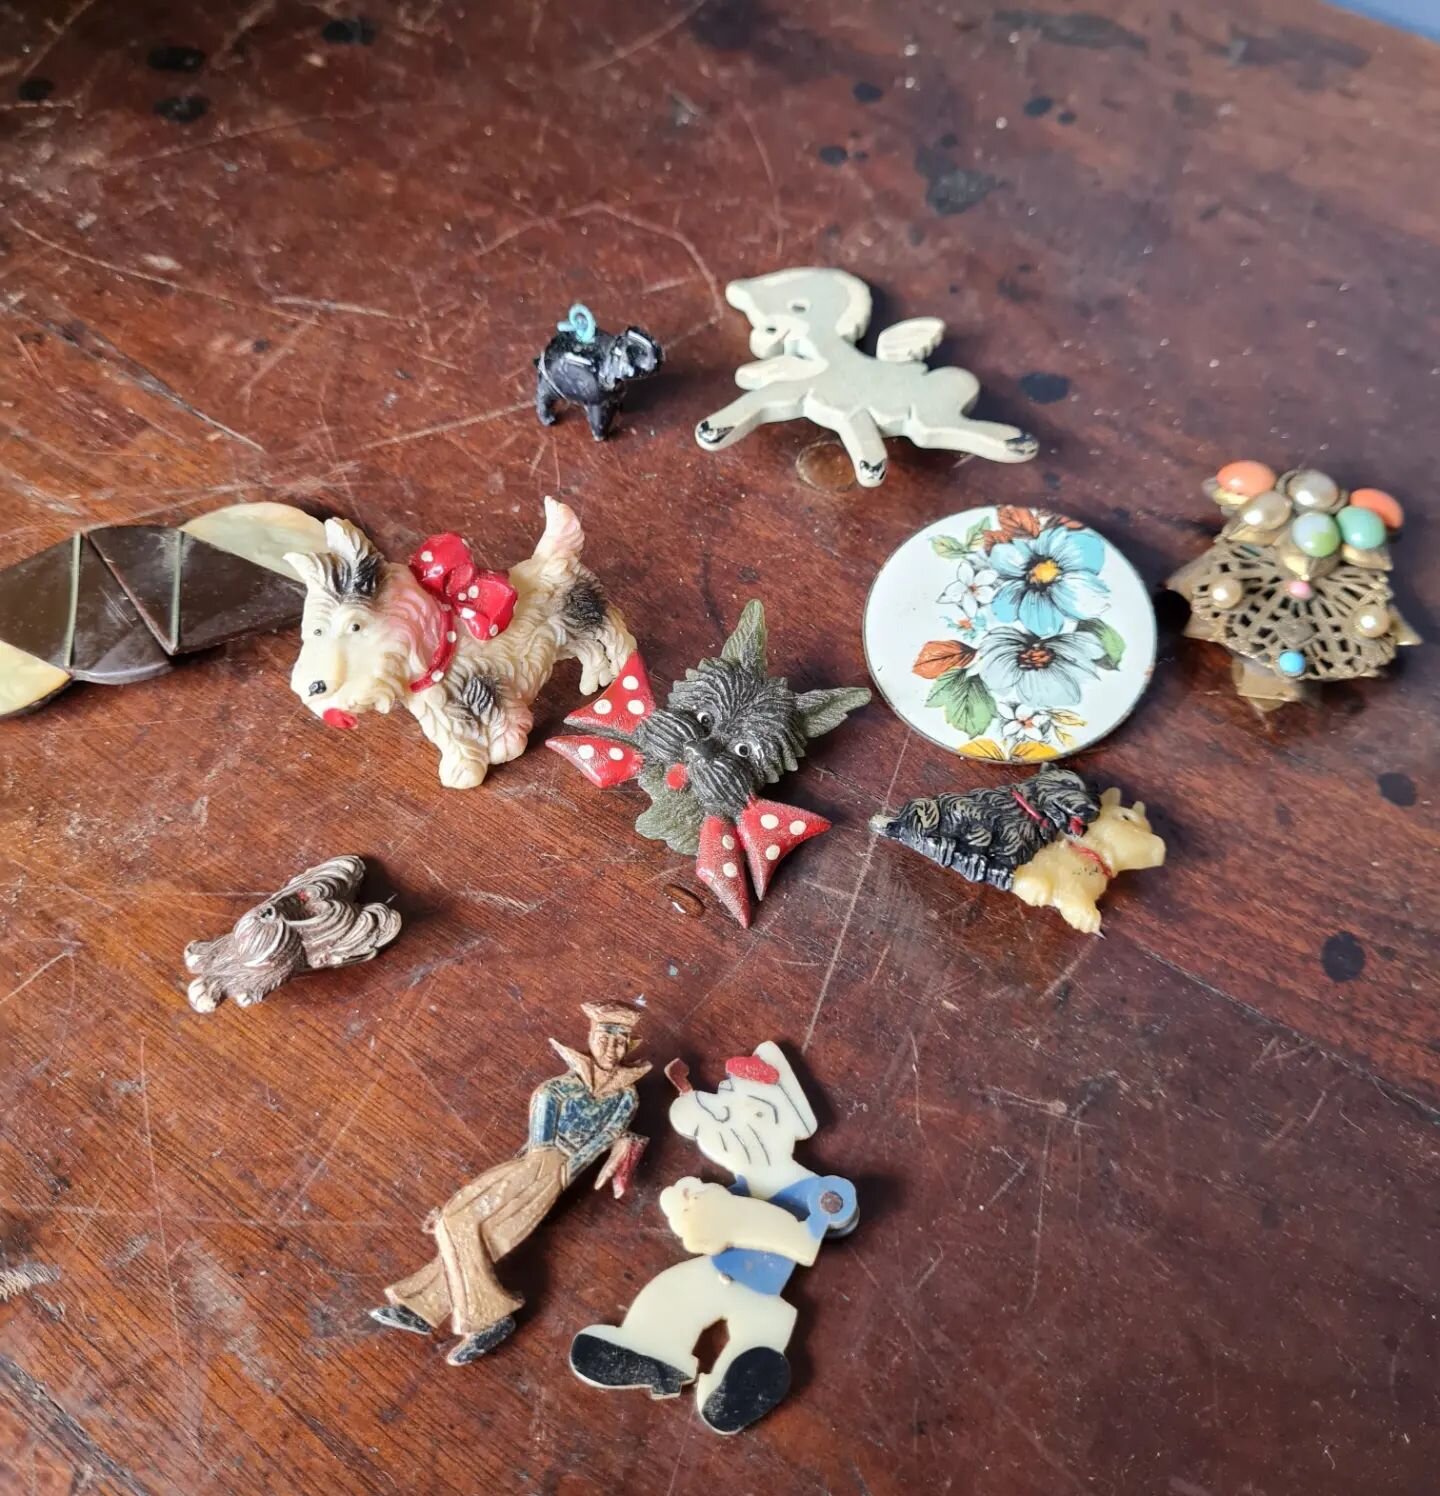 Collection of 1920 - 50's costume pieces.&nbsp; One little doggy and Popeye have their pins missing. $30 the lot.
Postage $9.70&nbsp; Australia wide.
Comment sold to purchase &amp; we will reply &amp; message to confirm.

We are happy to combine post